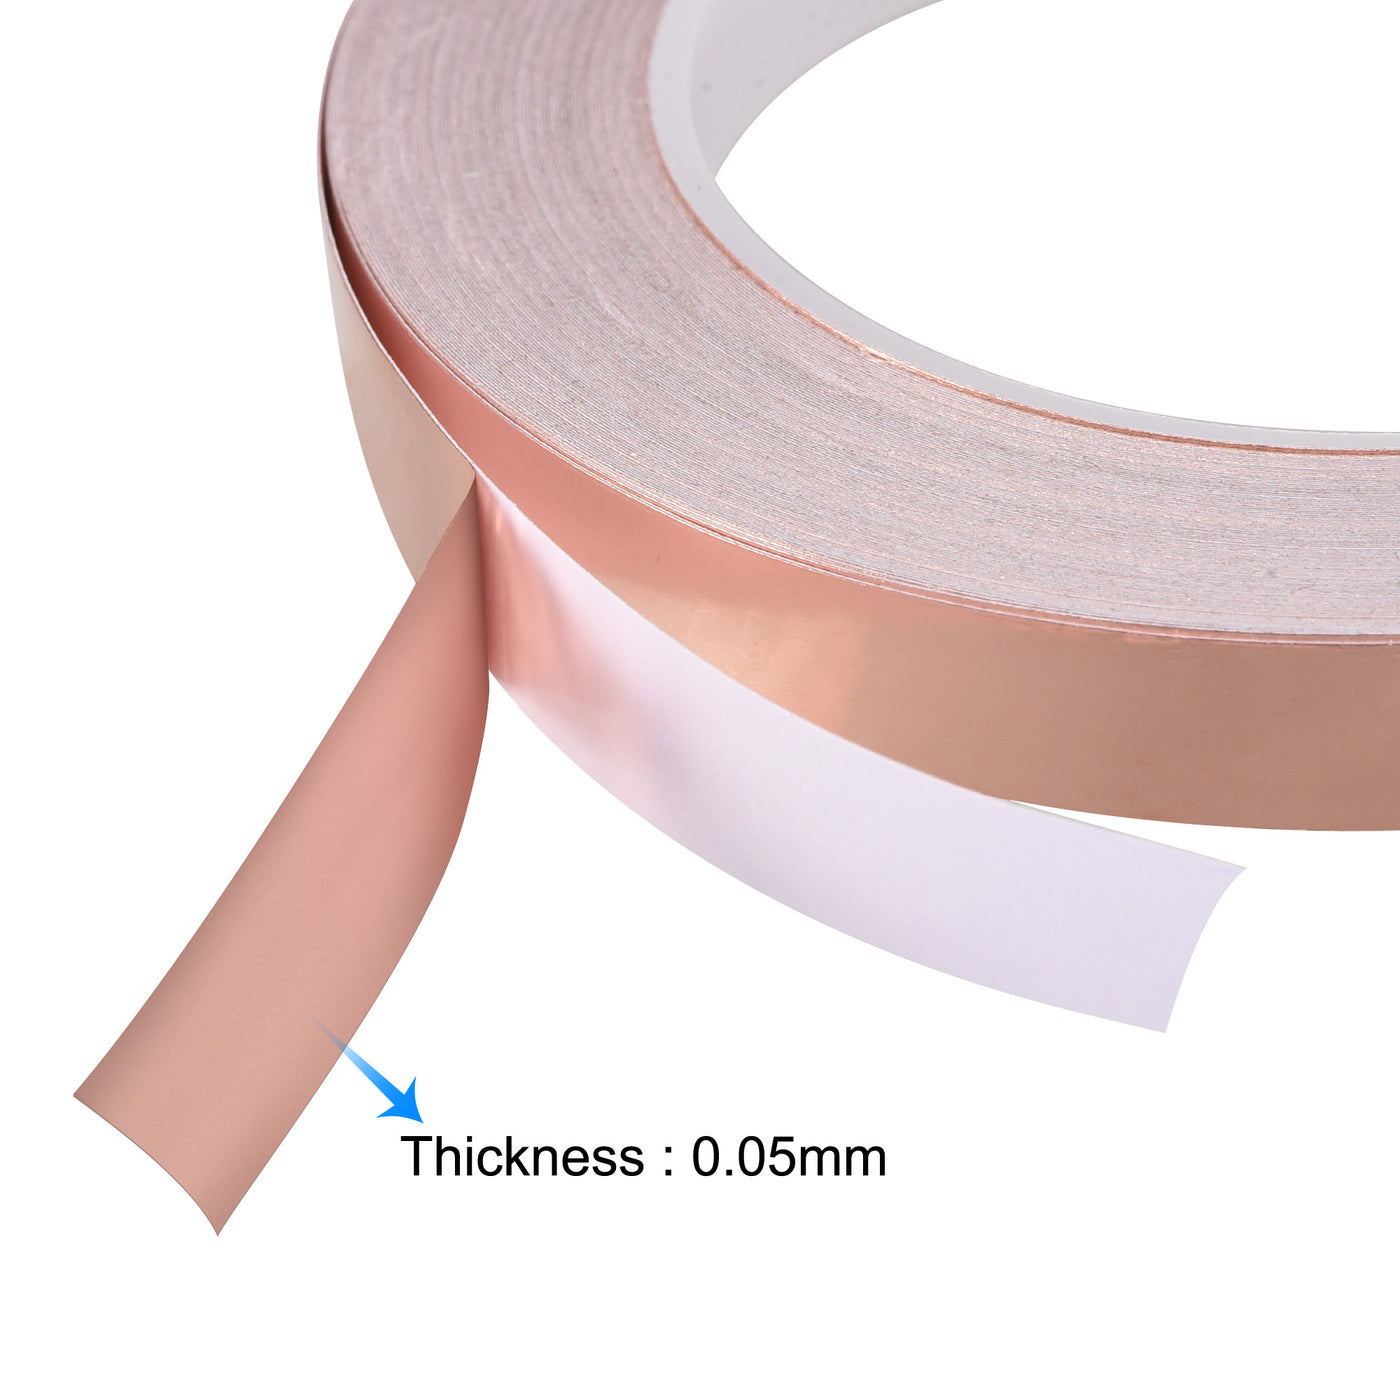 uxcell Uxcell Single-Sided Conductive Tape Copper Foil Tape 12mm x 30m/98.4ft 2pcs